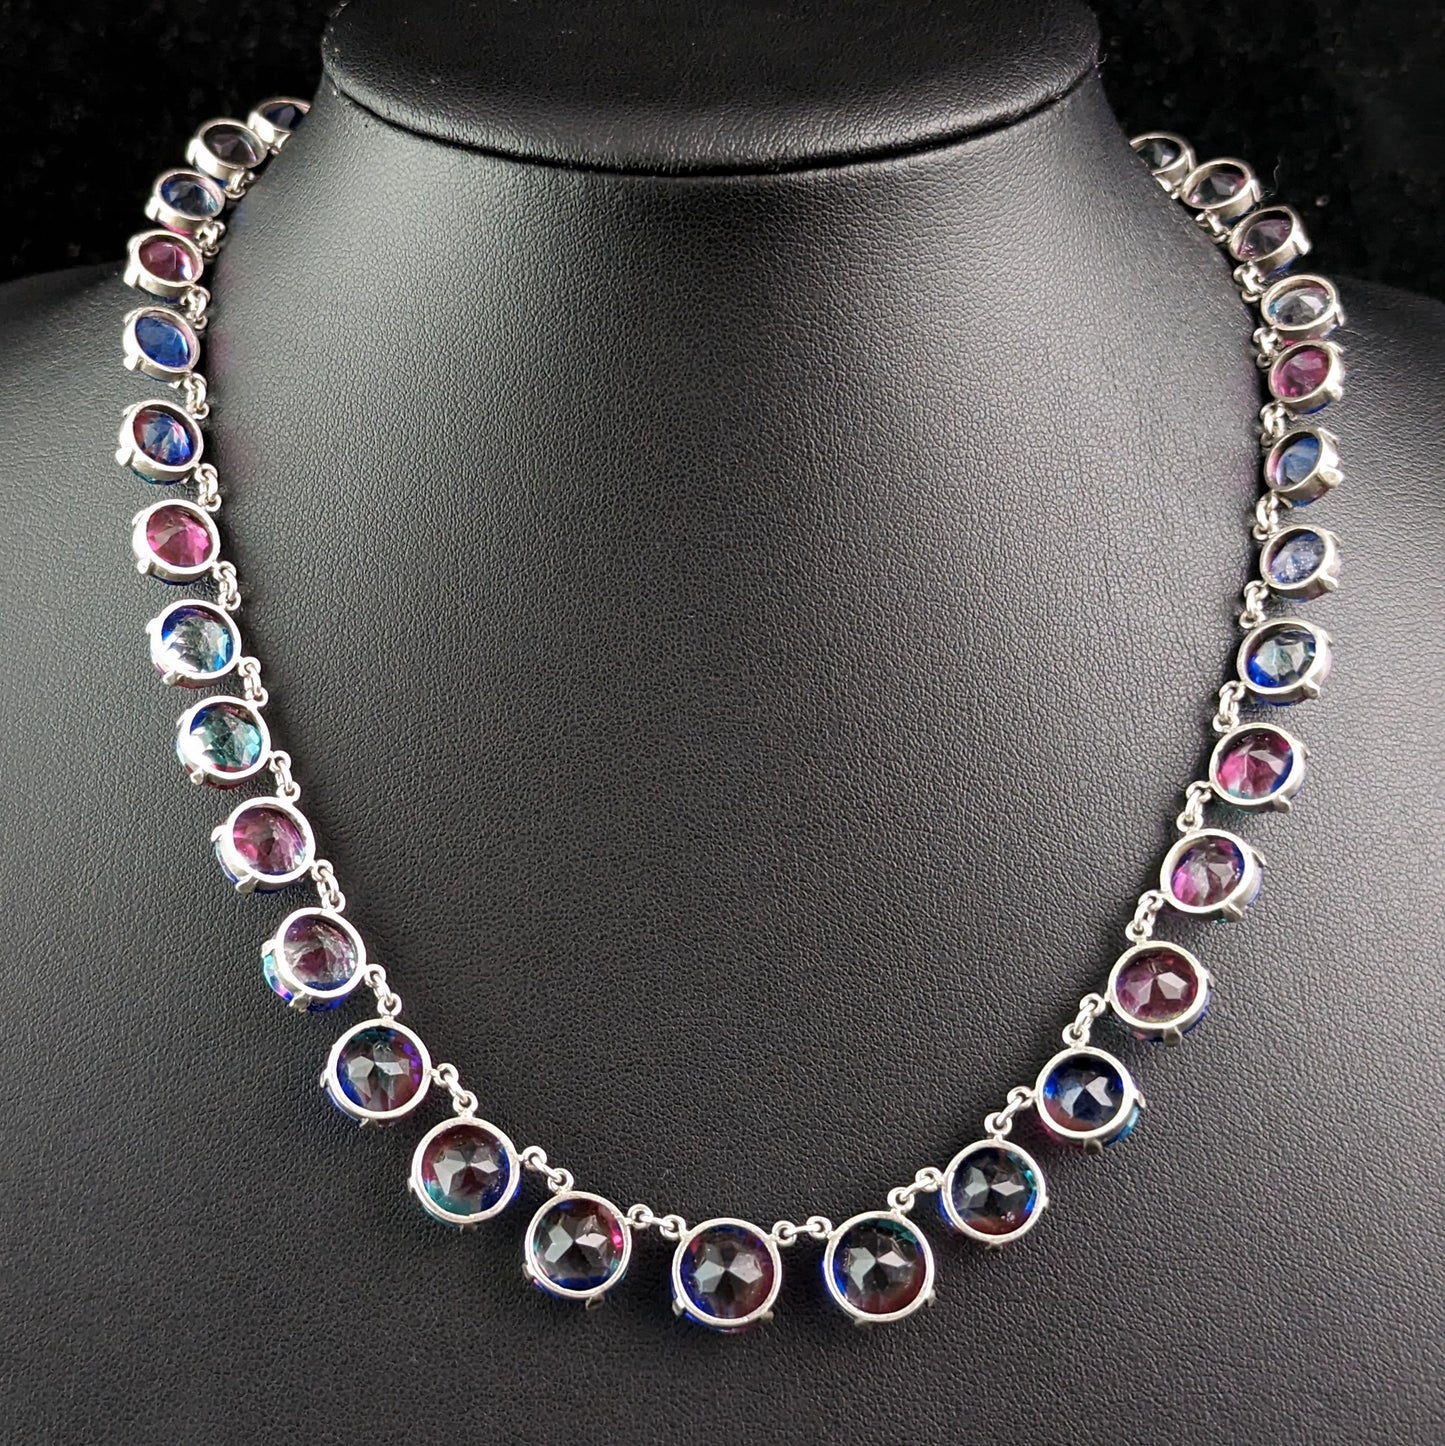 Vintage Art Deco sterling silver and Iris glass riviere necklace